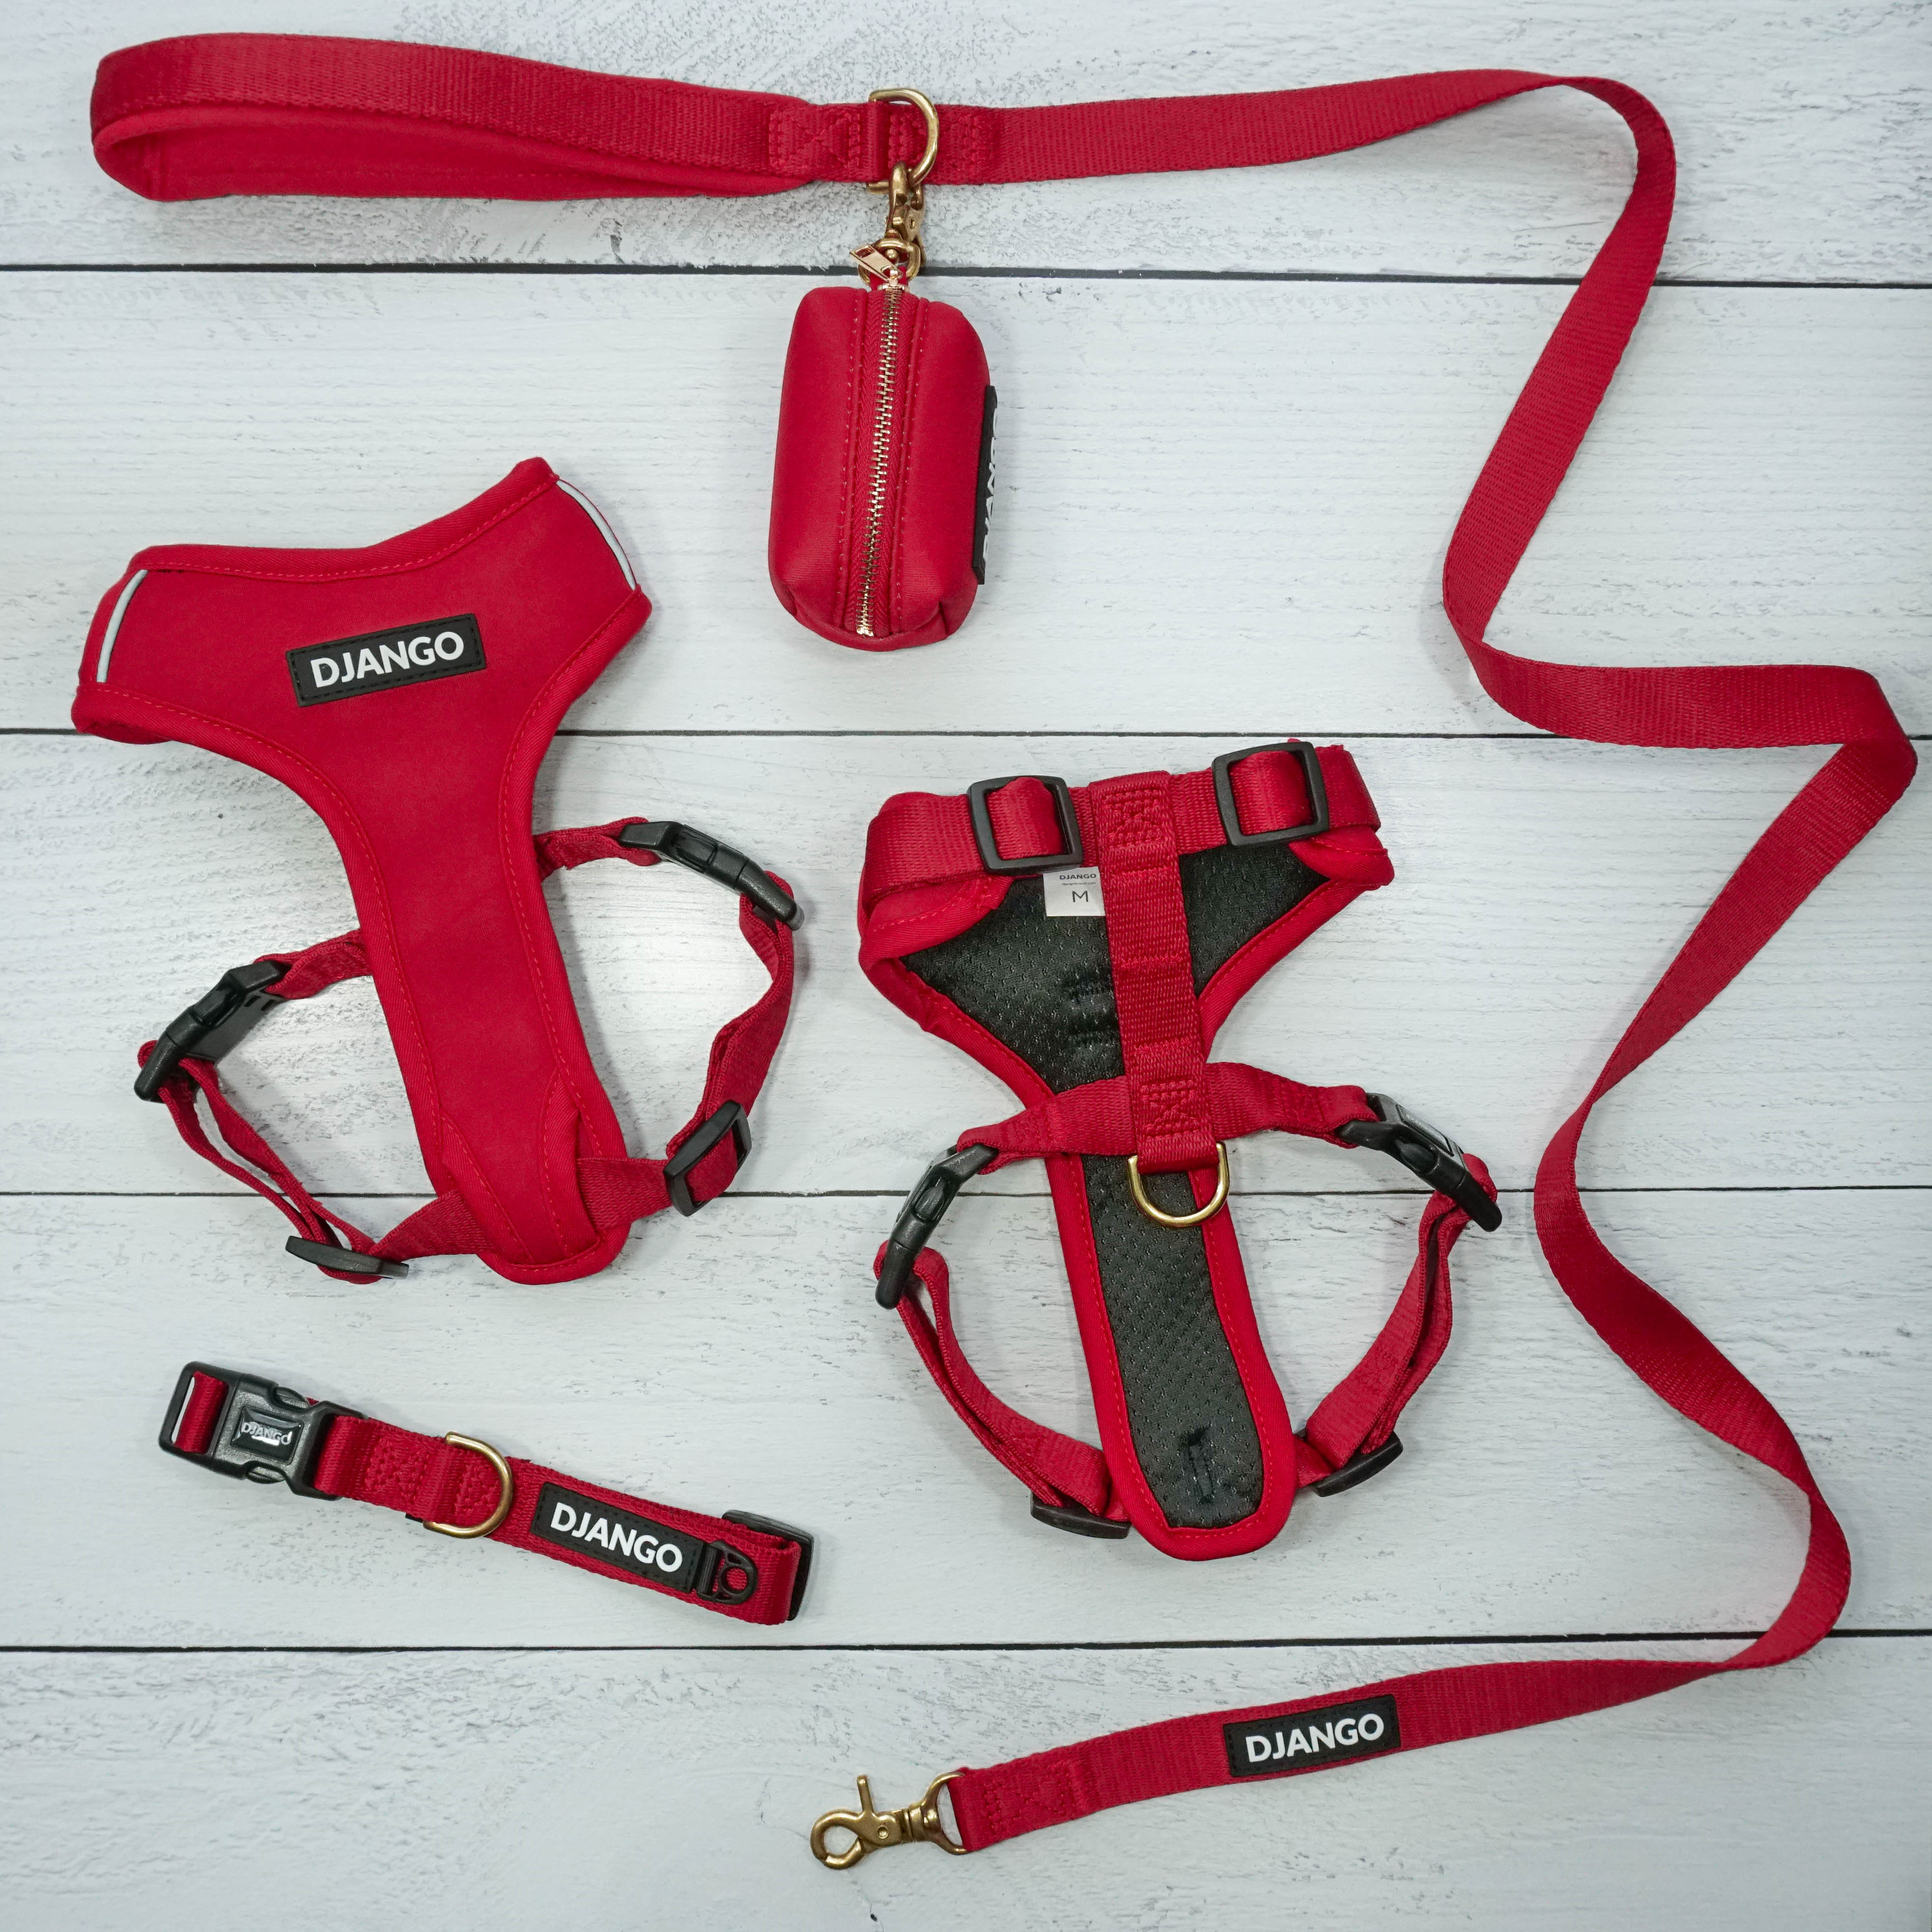 DJANGO Adventure Bundle in Crimson Red - The Adventure Bundle includes our comfortable, durable, and weather-resistant Adventure Dog Harness, Adventure Dog Collar, Standard Adventure Dog Leash, and chic Waste Bag Holder. All items feature high-strength and corrosion-resistant solid brass hardware. Save $$$ when you complete your set and order the Adventure Bundle - djangobrand.com